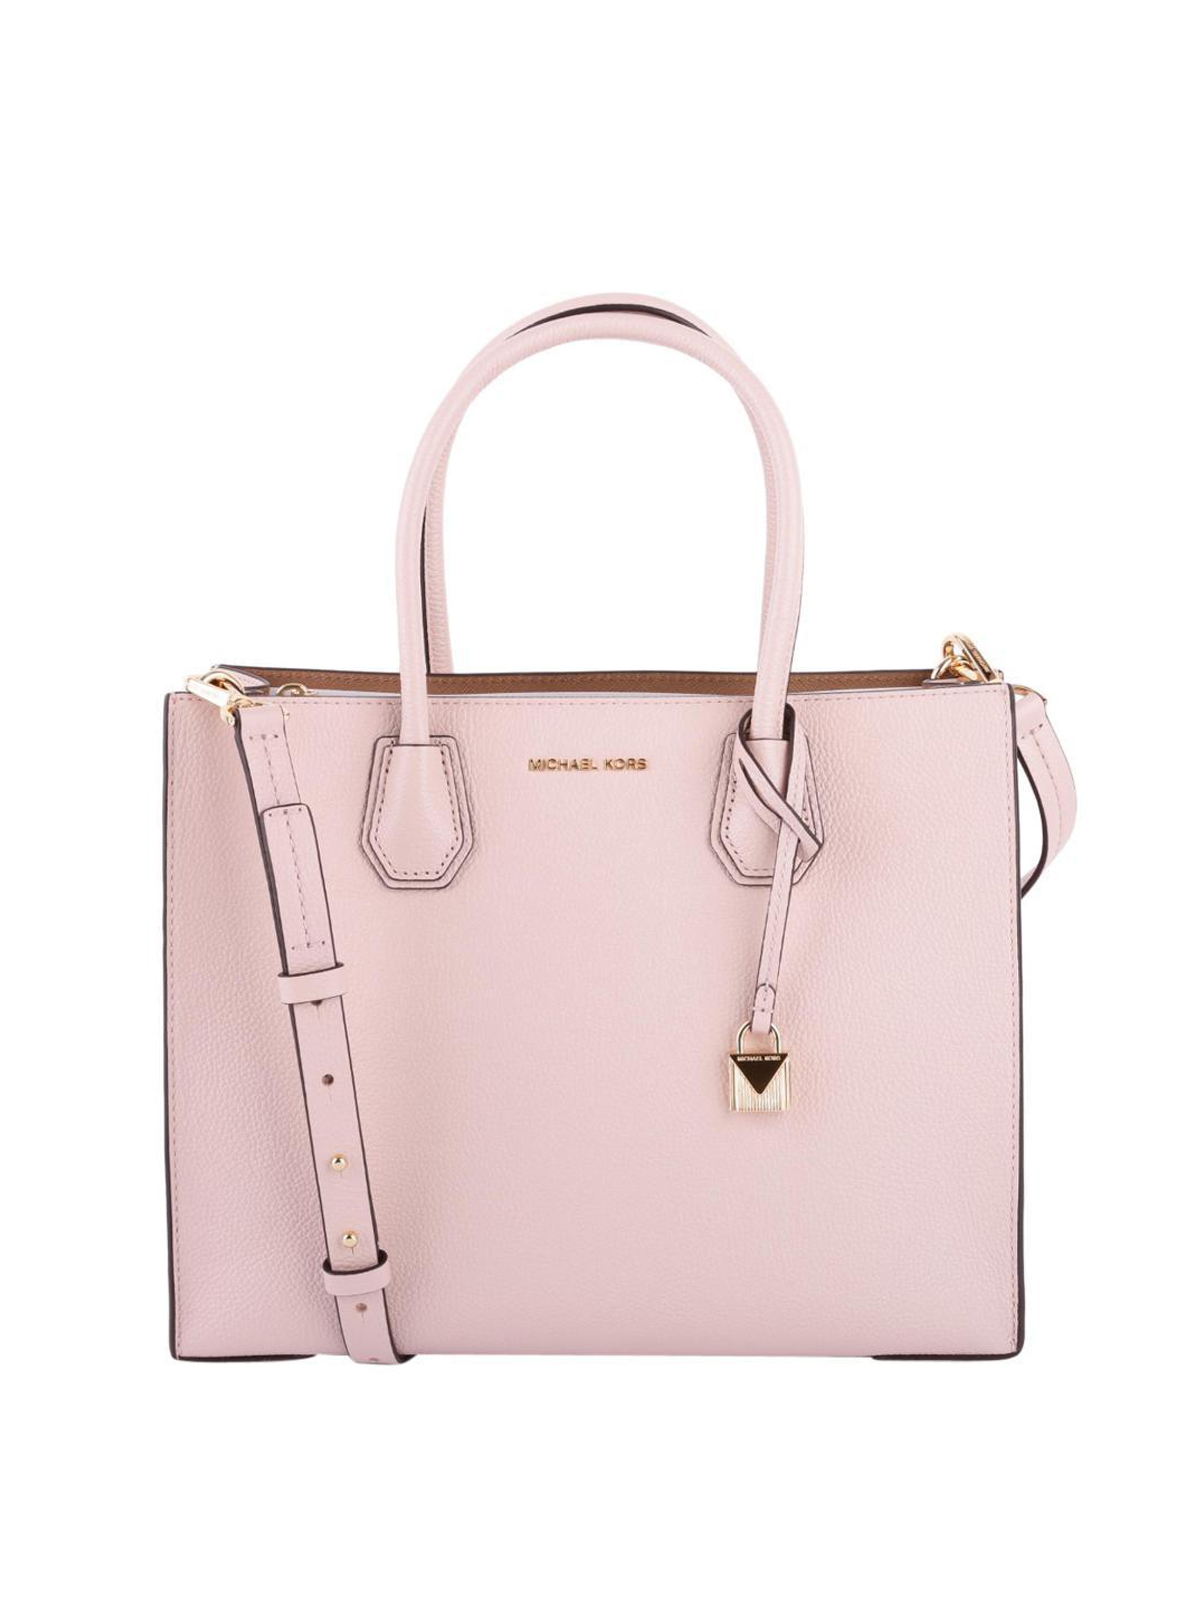 Totes bags Michael Kors  Mercer large soft pink leather tote   30F6GM9T3L187